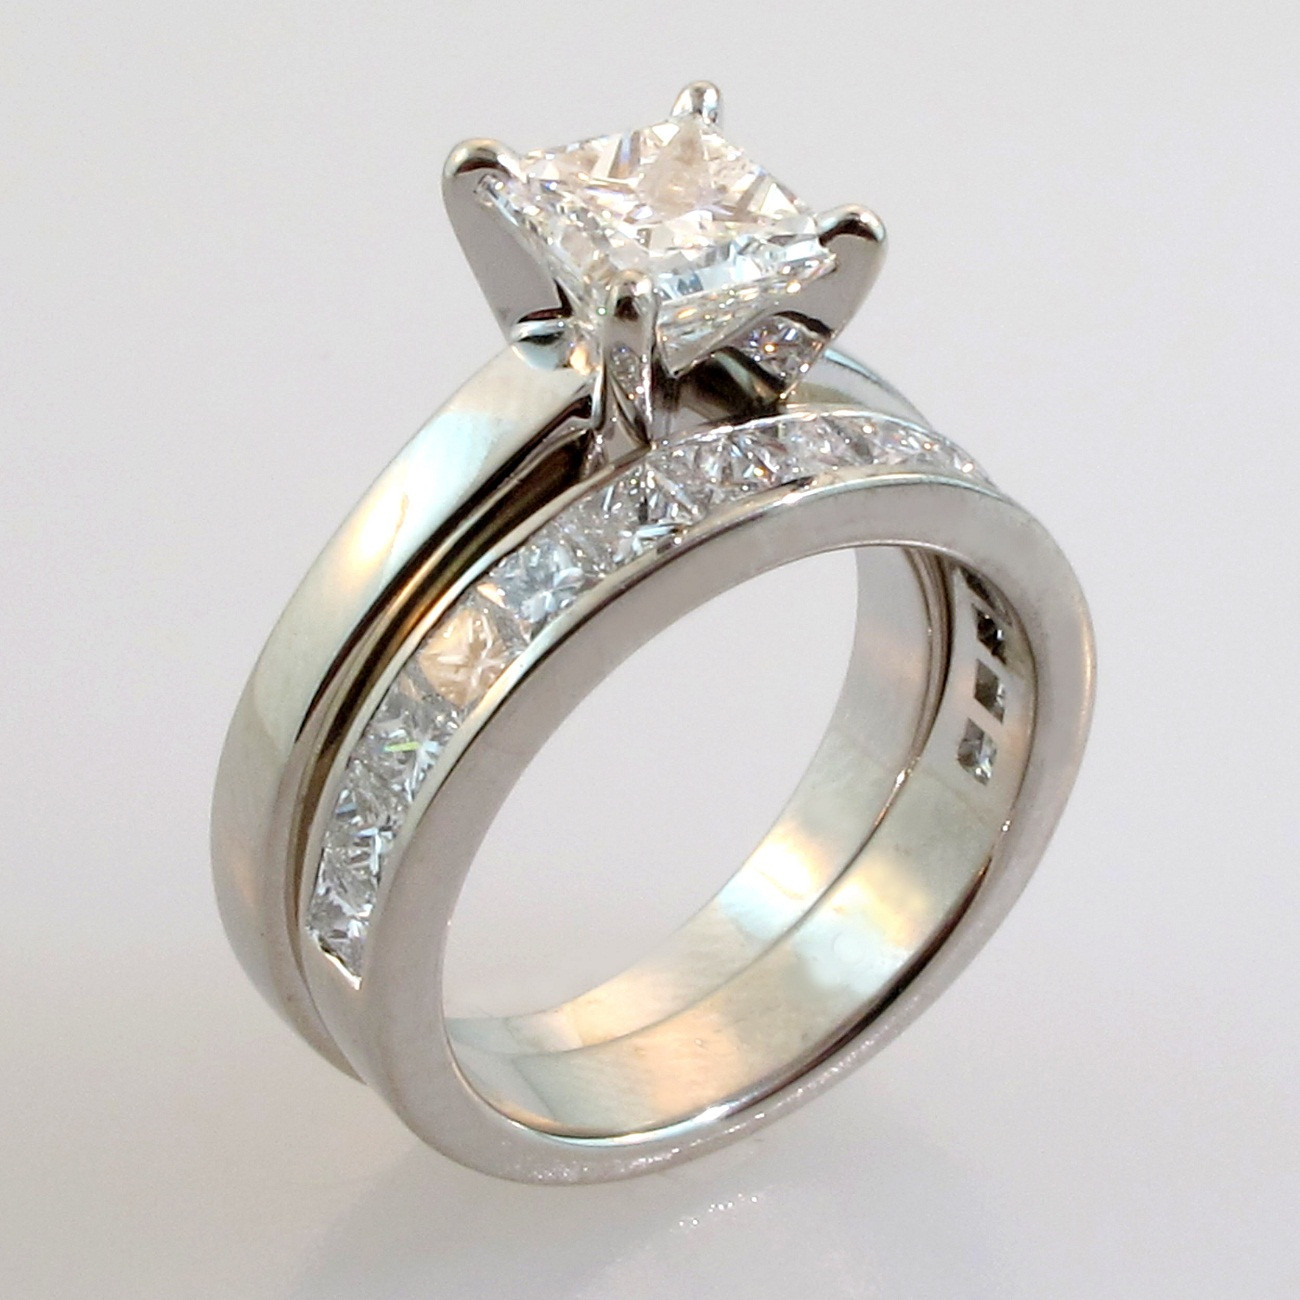 Picture Of Wedding Rings
 Engagement And Wedding Ring Sets We Need Fun